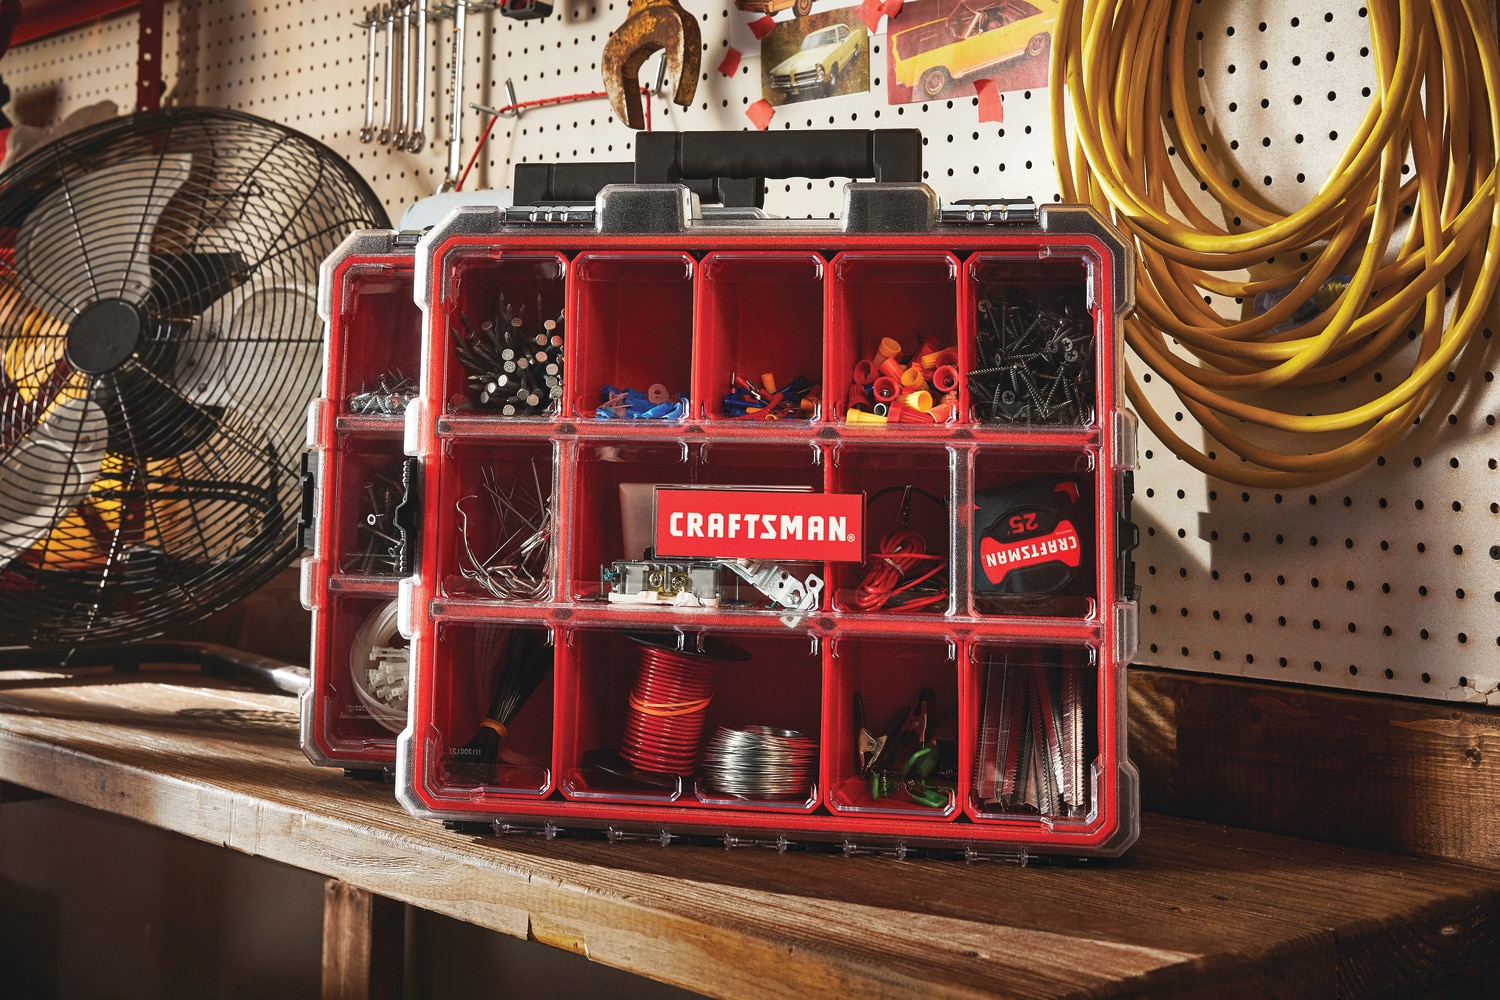 Craftsman 2-Pack 14-Compartment Plastic Small Parts Organizers | CMST60944M